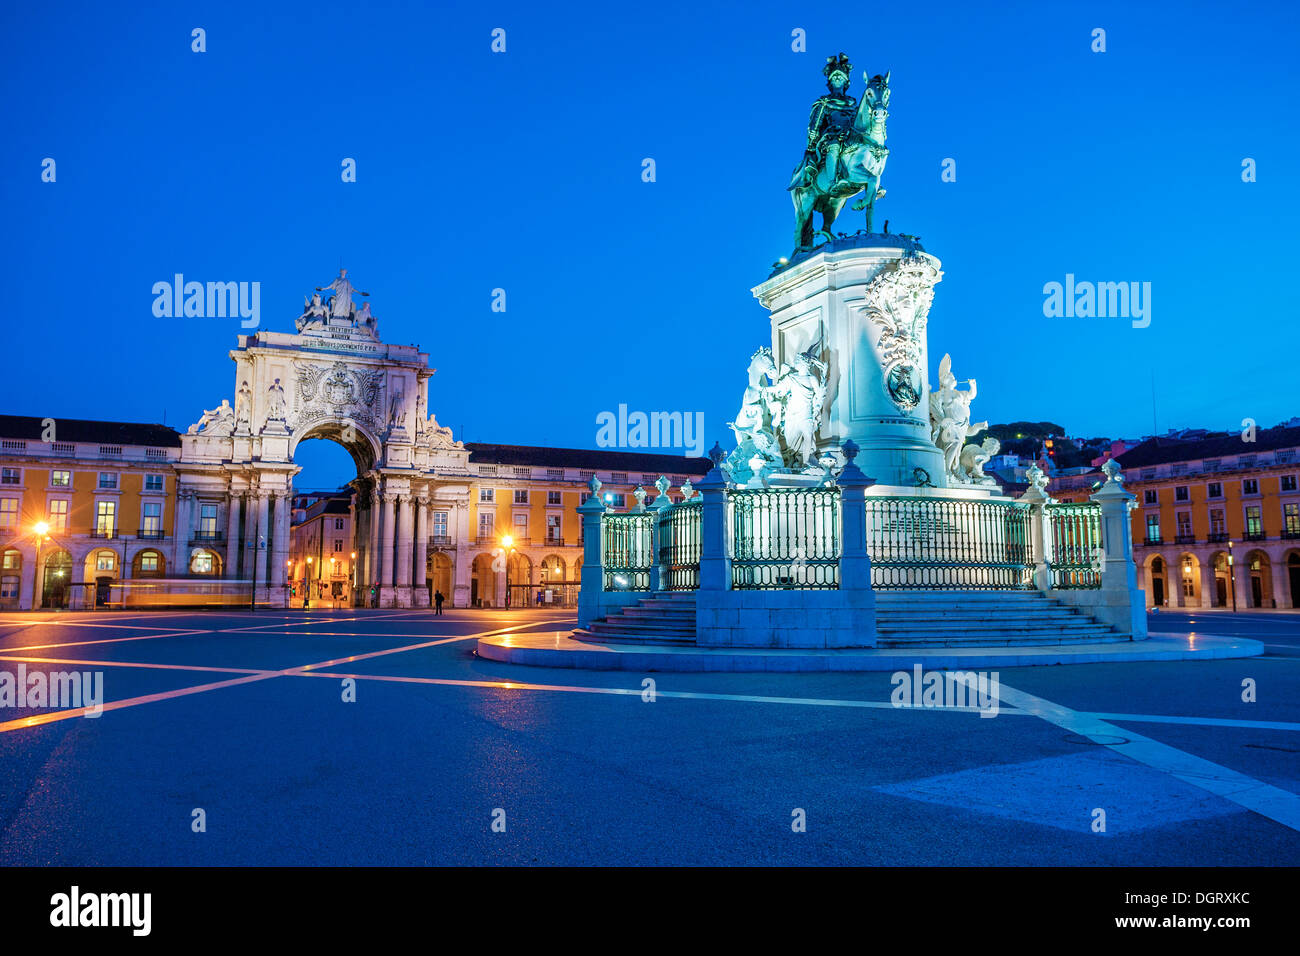 View on the Commerce Square and statue of King Joze I in evening illumination, Lisbon, Portugal. Stock Photo